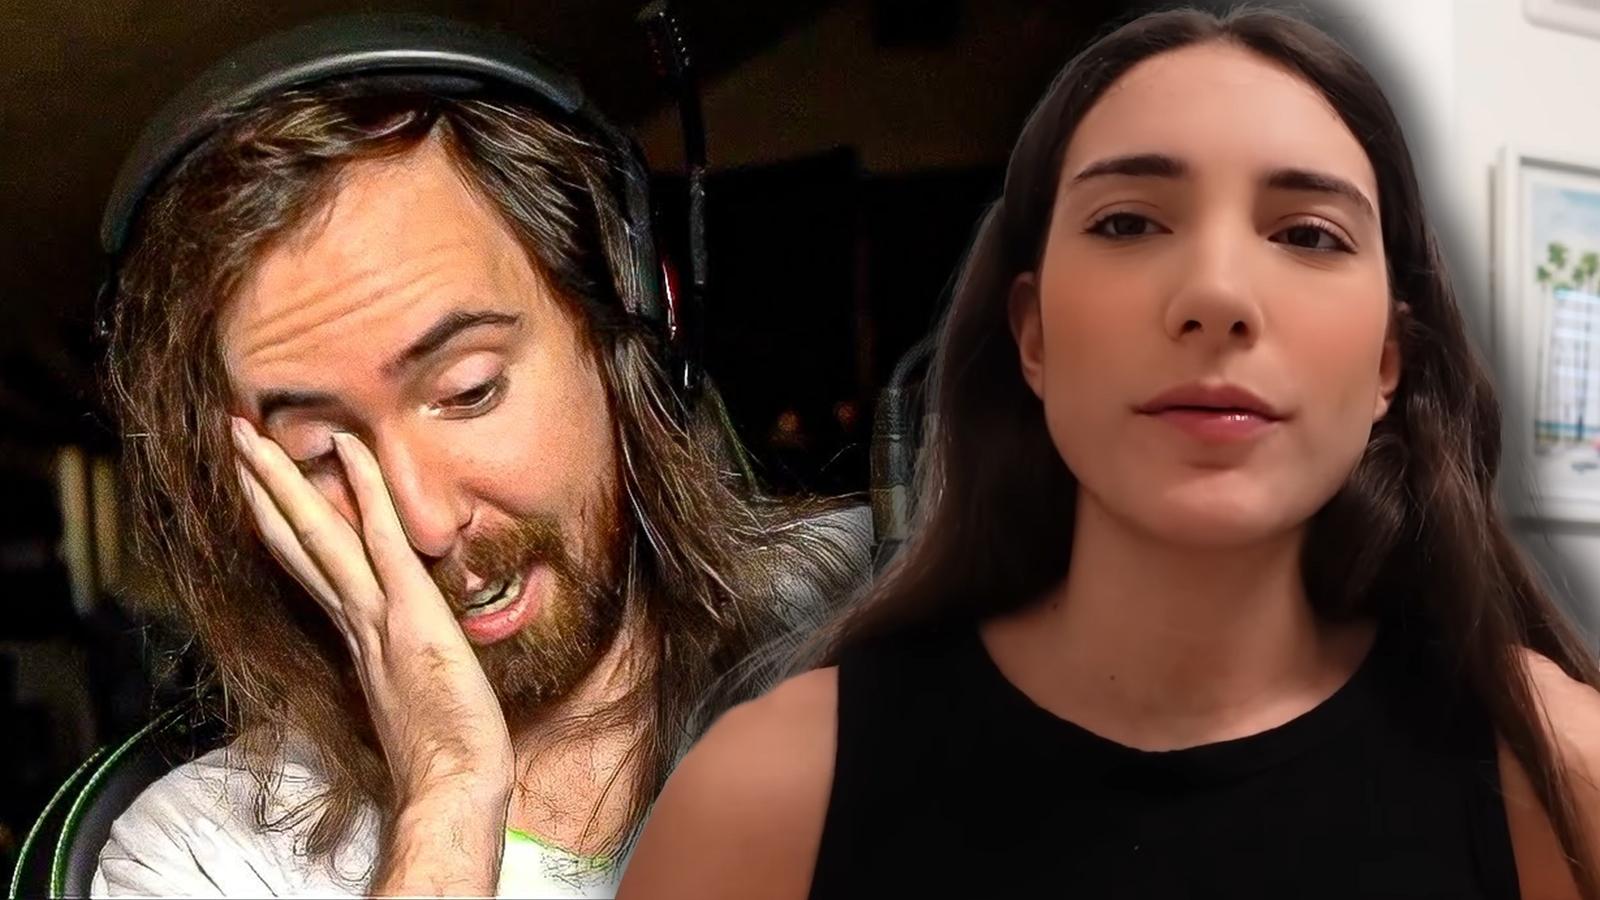 Twitch streamers Asmongold and Nadia